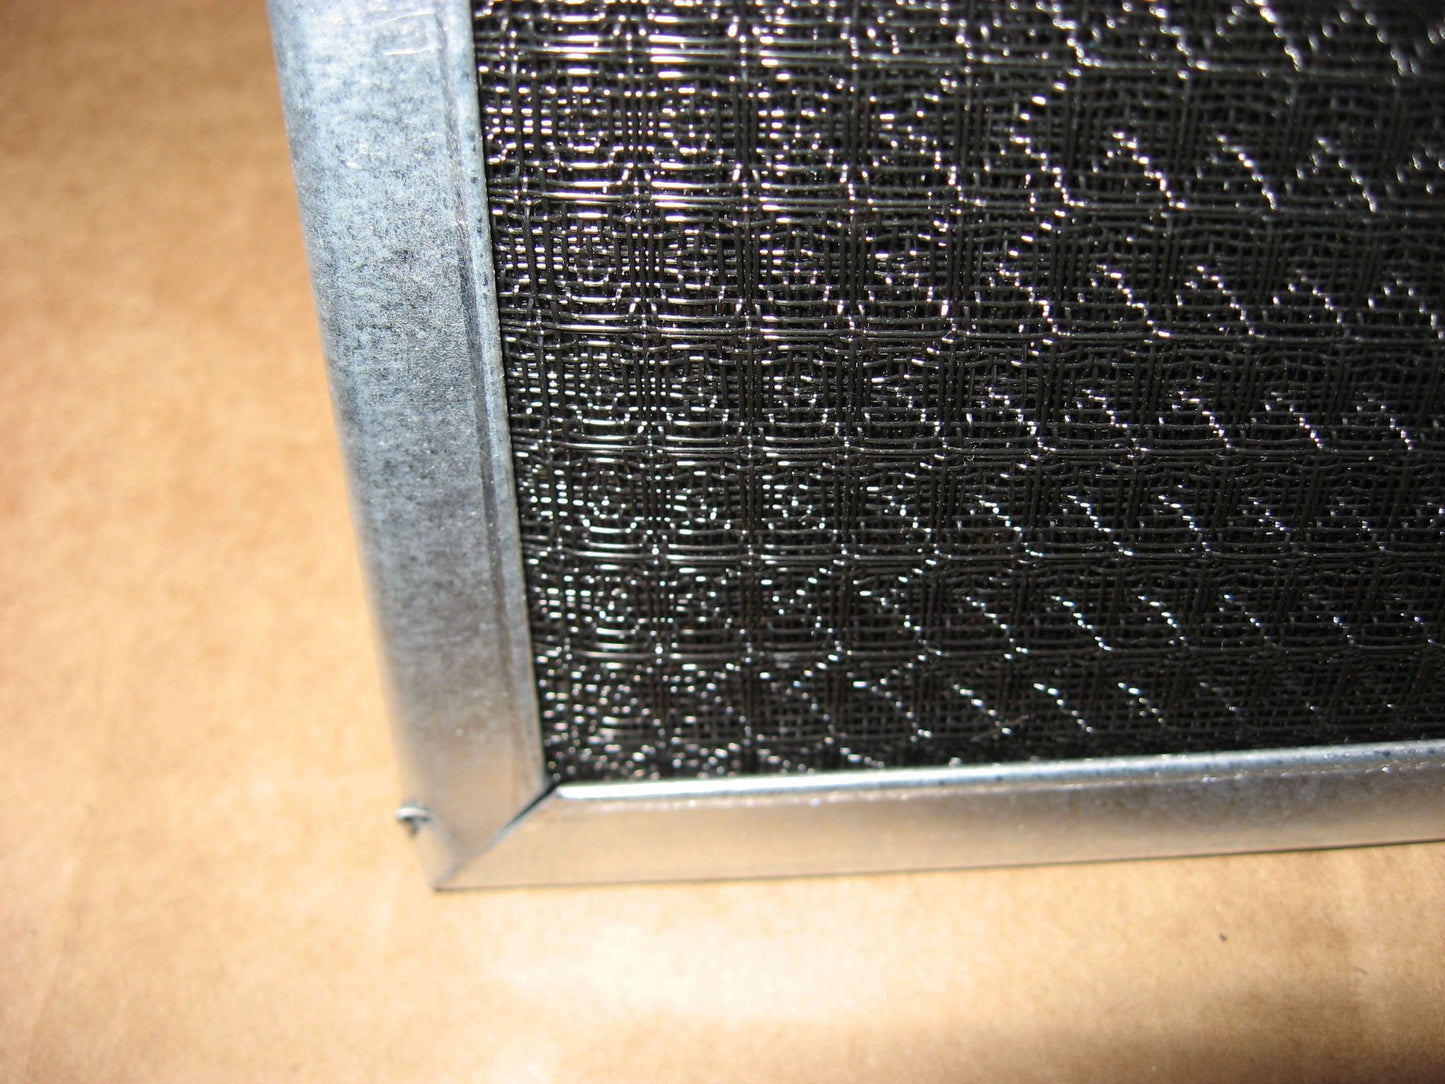 Permanent 1/4 Inch Pre-Filters for Electronic Air Cleaners (EAC)